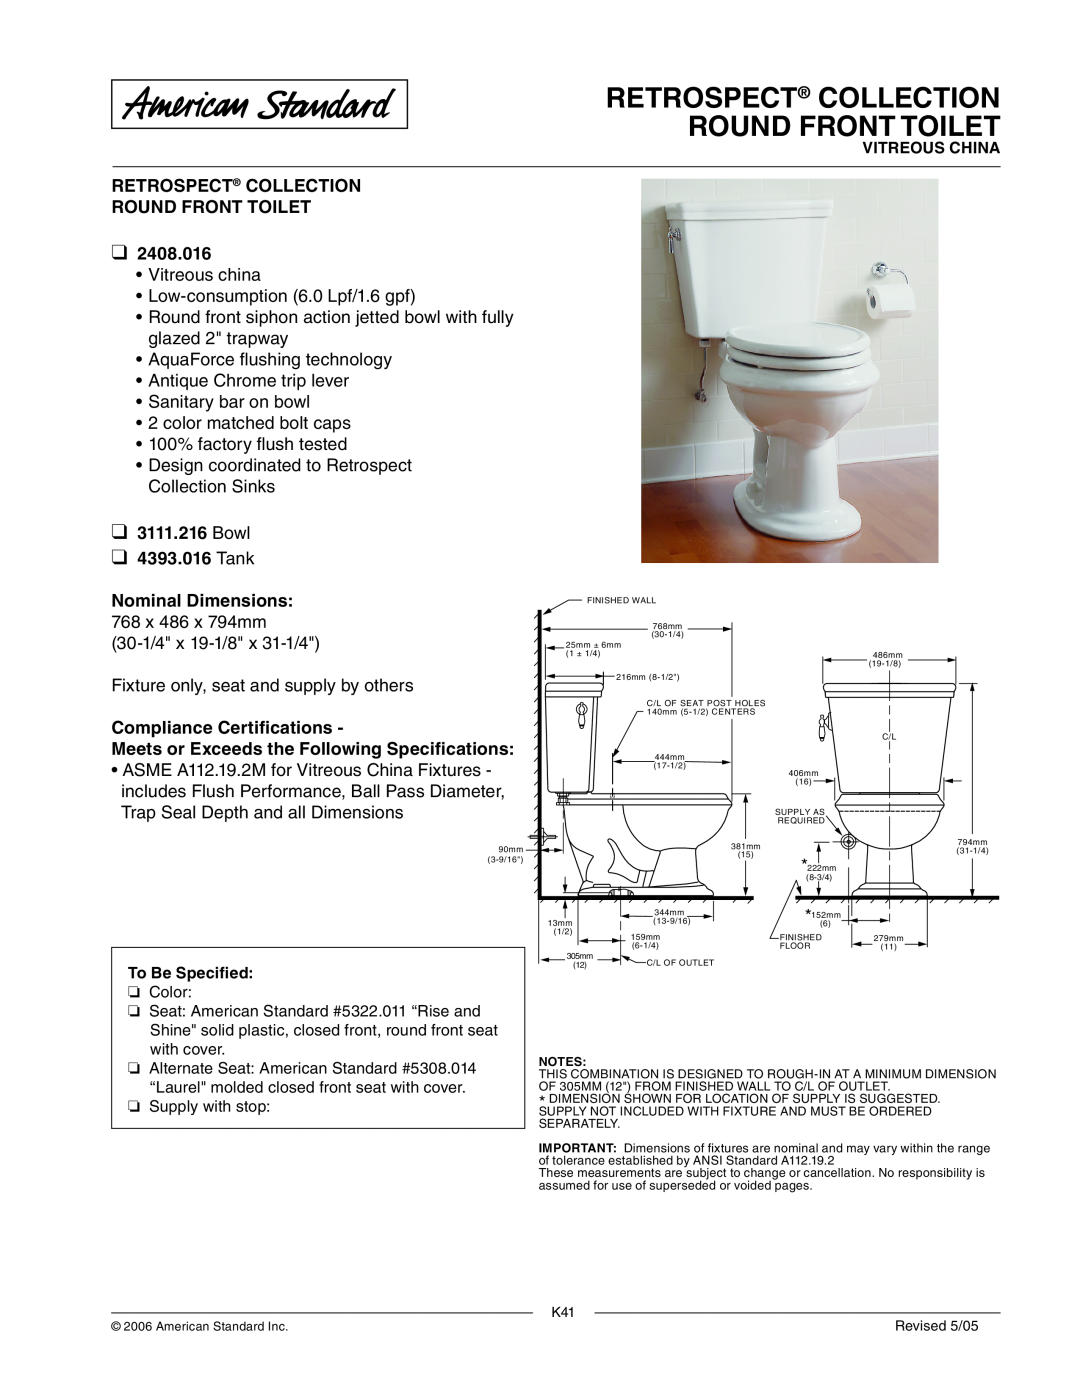 American Standard 3111.216 dimensions Retrospect Collection Round Front Toilet, Bowl 4393.016 Tank, Nominal Dimensions 